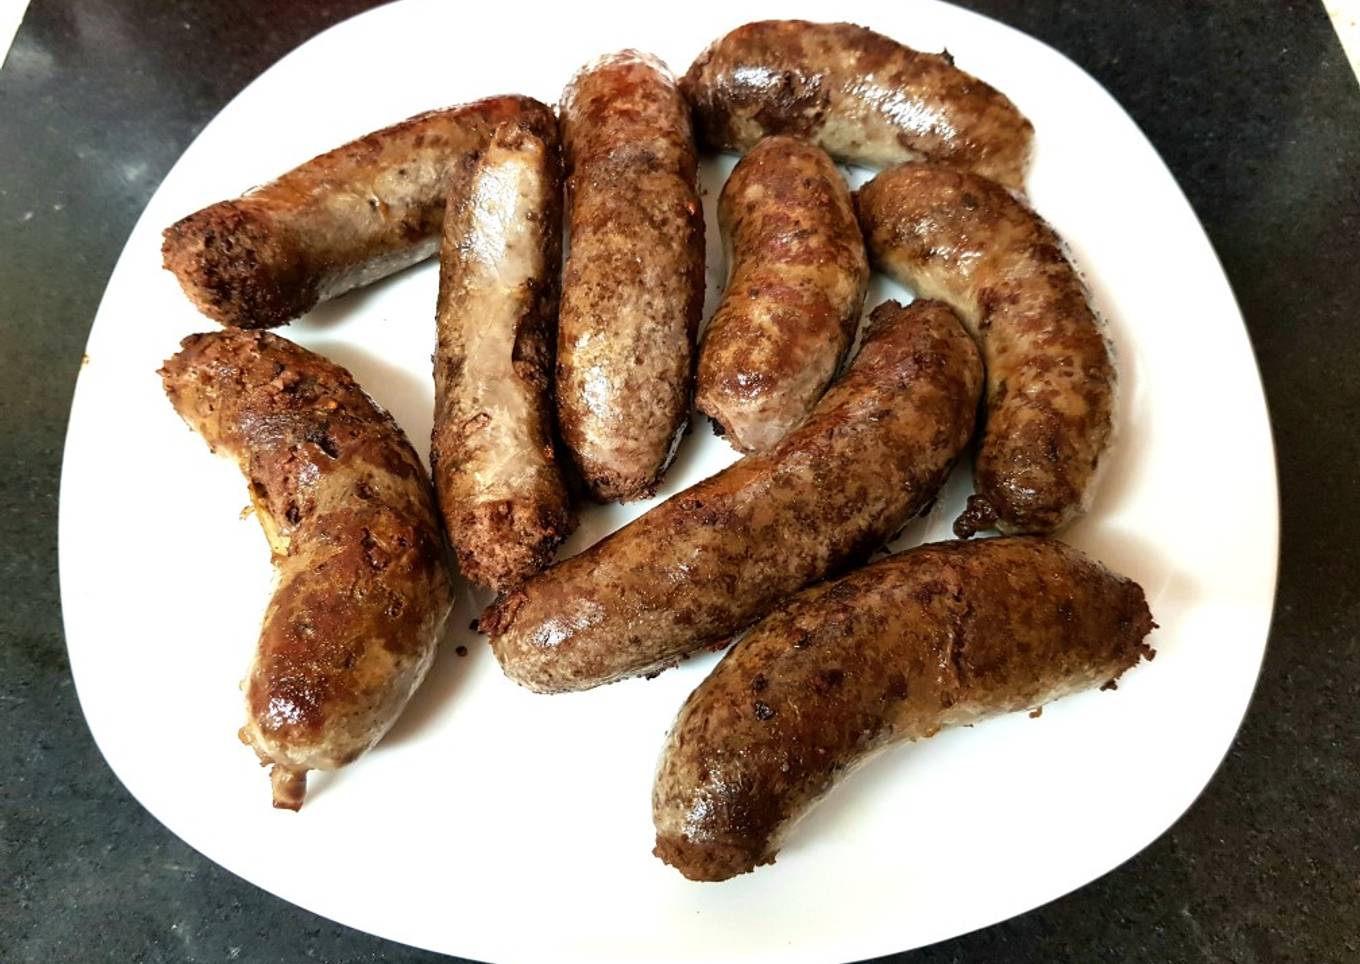 My Own Beef Sausage maker 😀